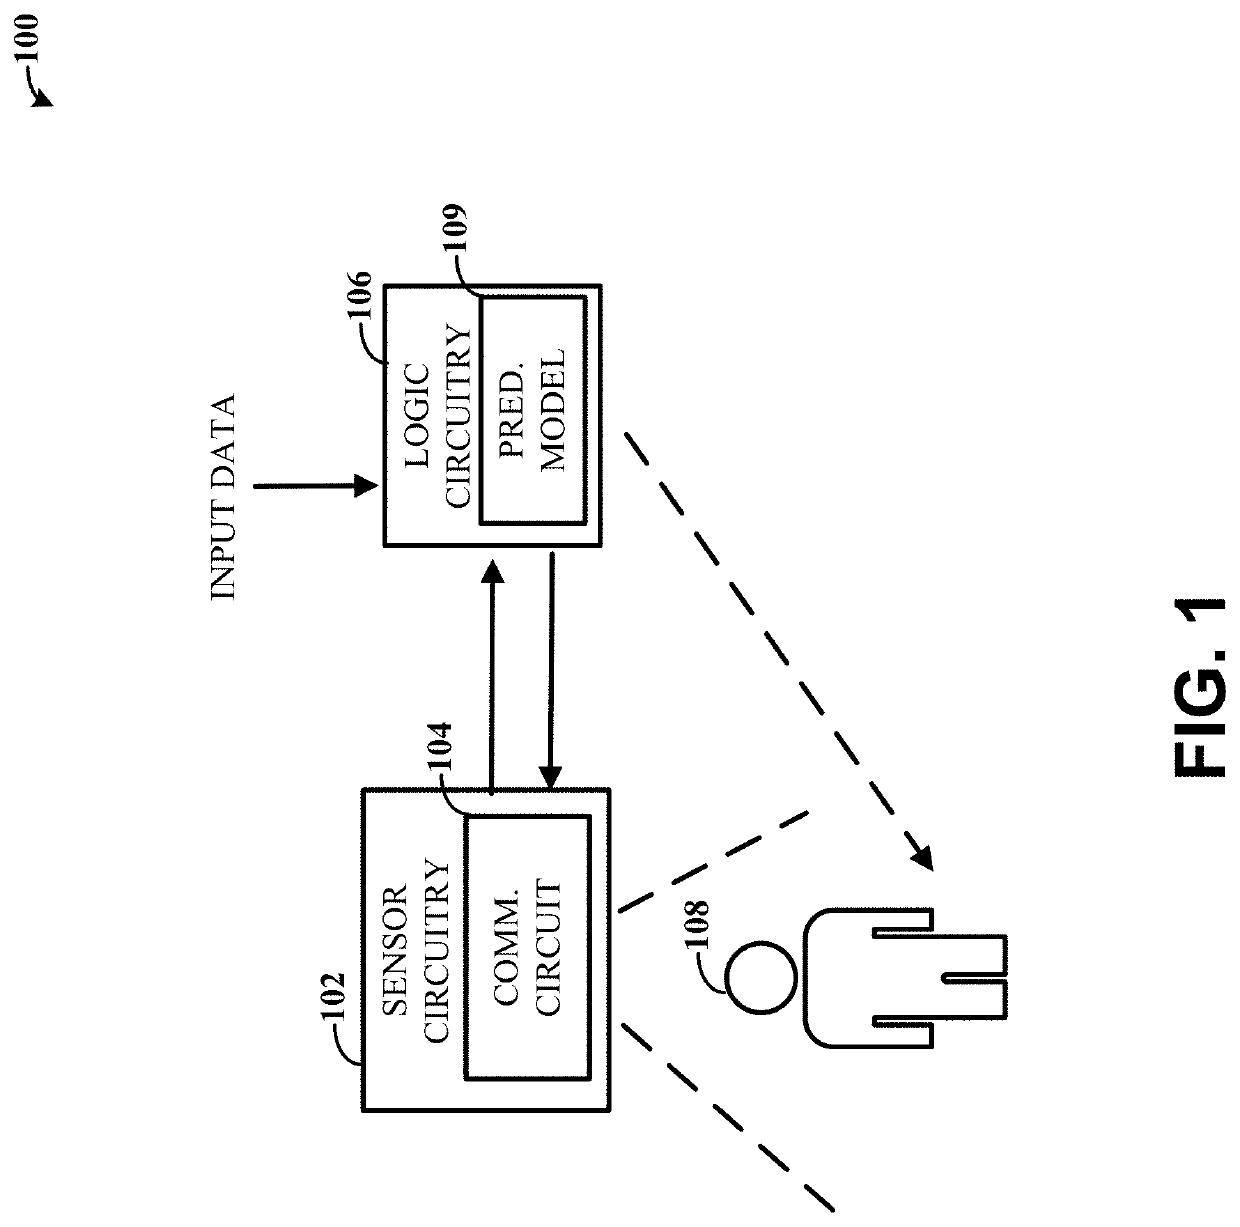 Systems and methods involving predictive modeling of hot flashes